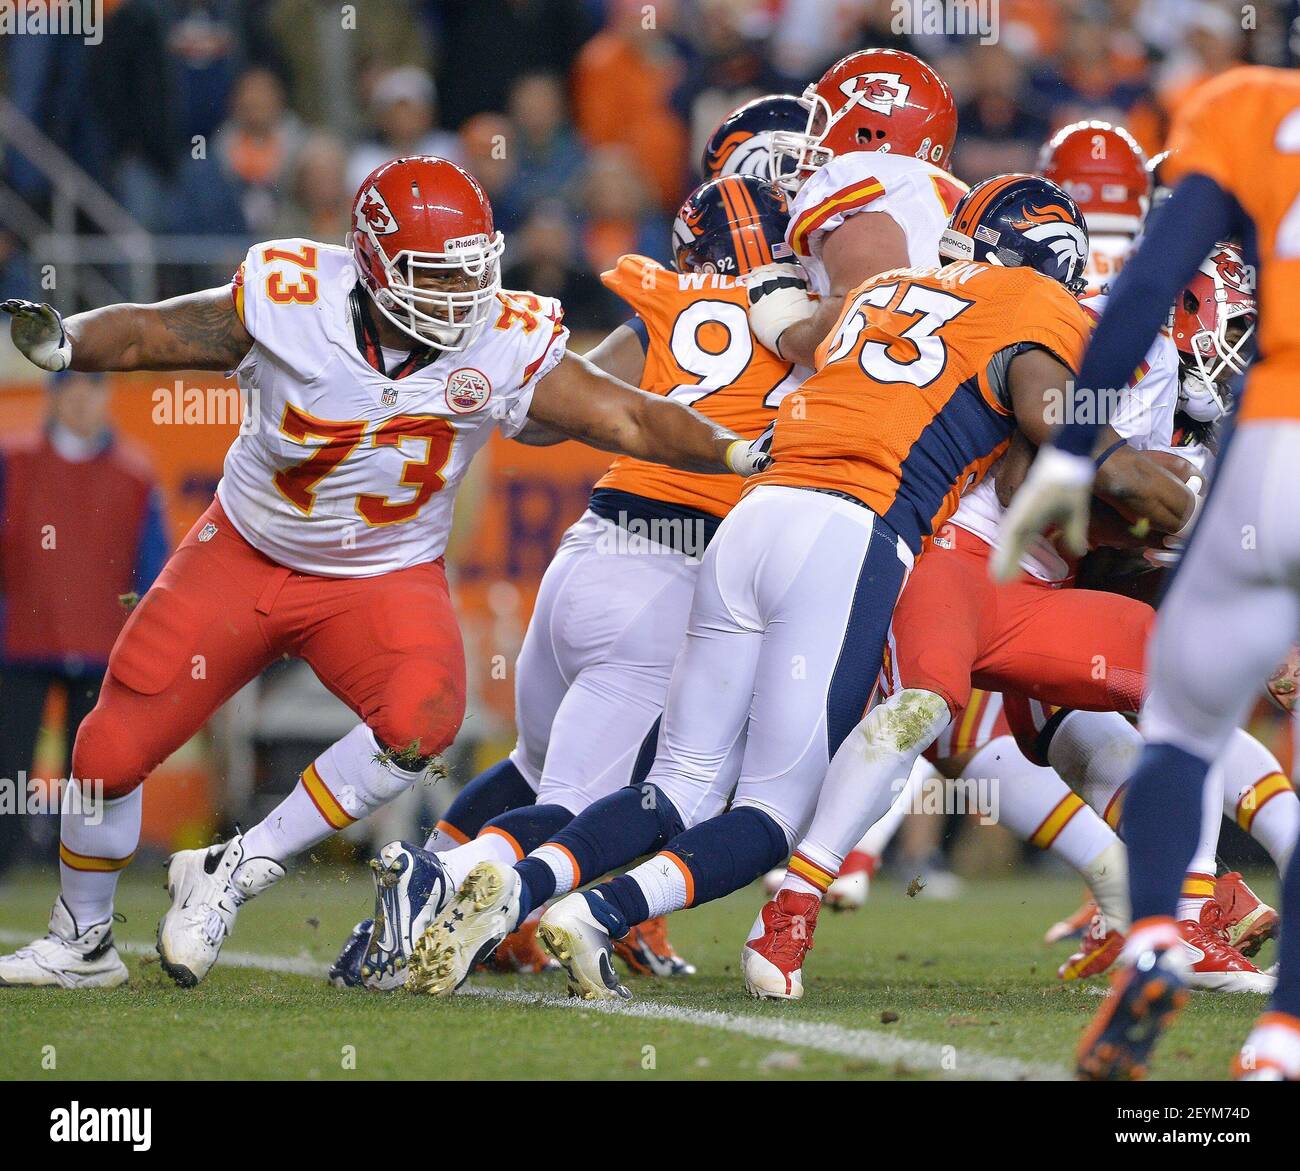 Steven Johnson (53) of the Denver Broncos stops Jamaal Charles (25) of the Kansas City Chiefs from reaching the end zone to bring up fourth down during the second quarter in Denver on Sunday, Nov. 17, 2013. (Photo by John Sleezer/Kansas City Star/MCT/Sipa USA) Stock Photo